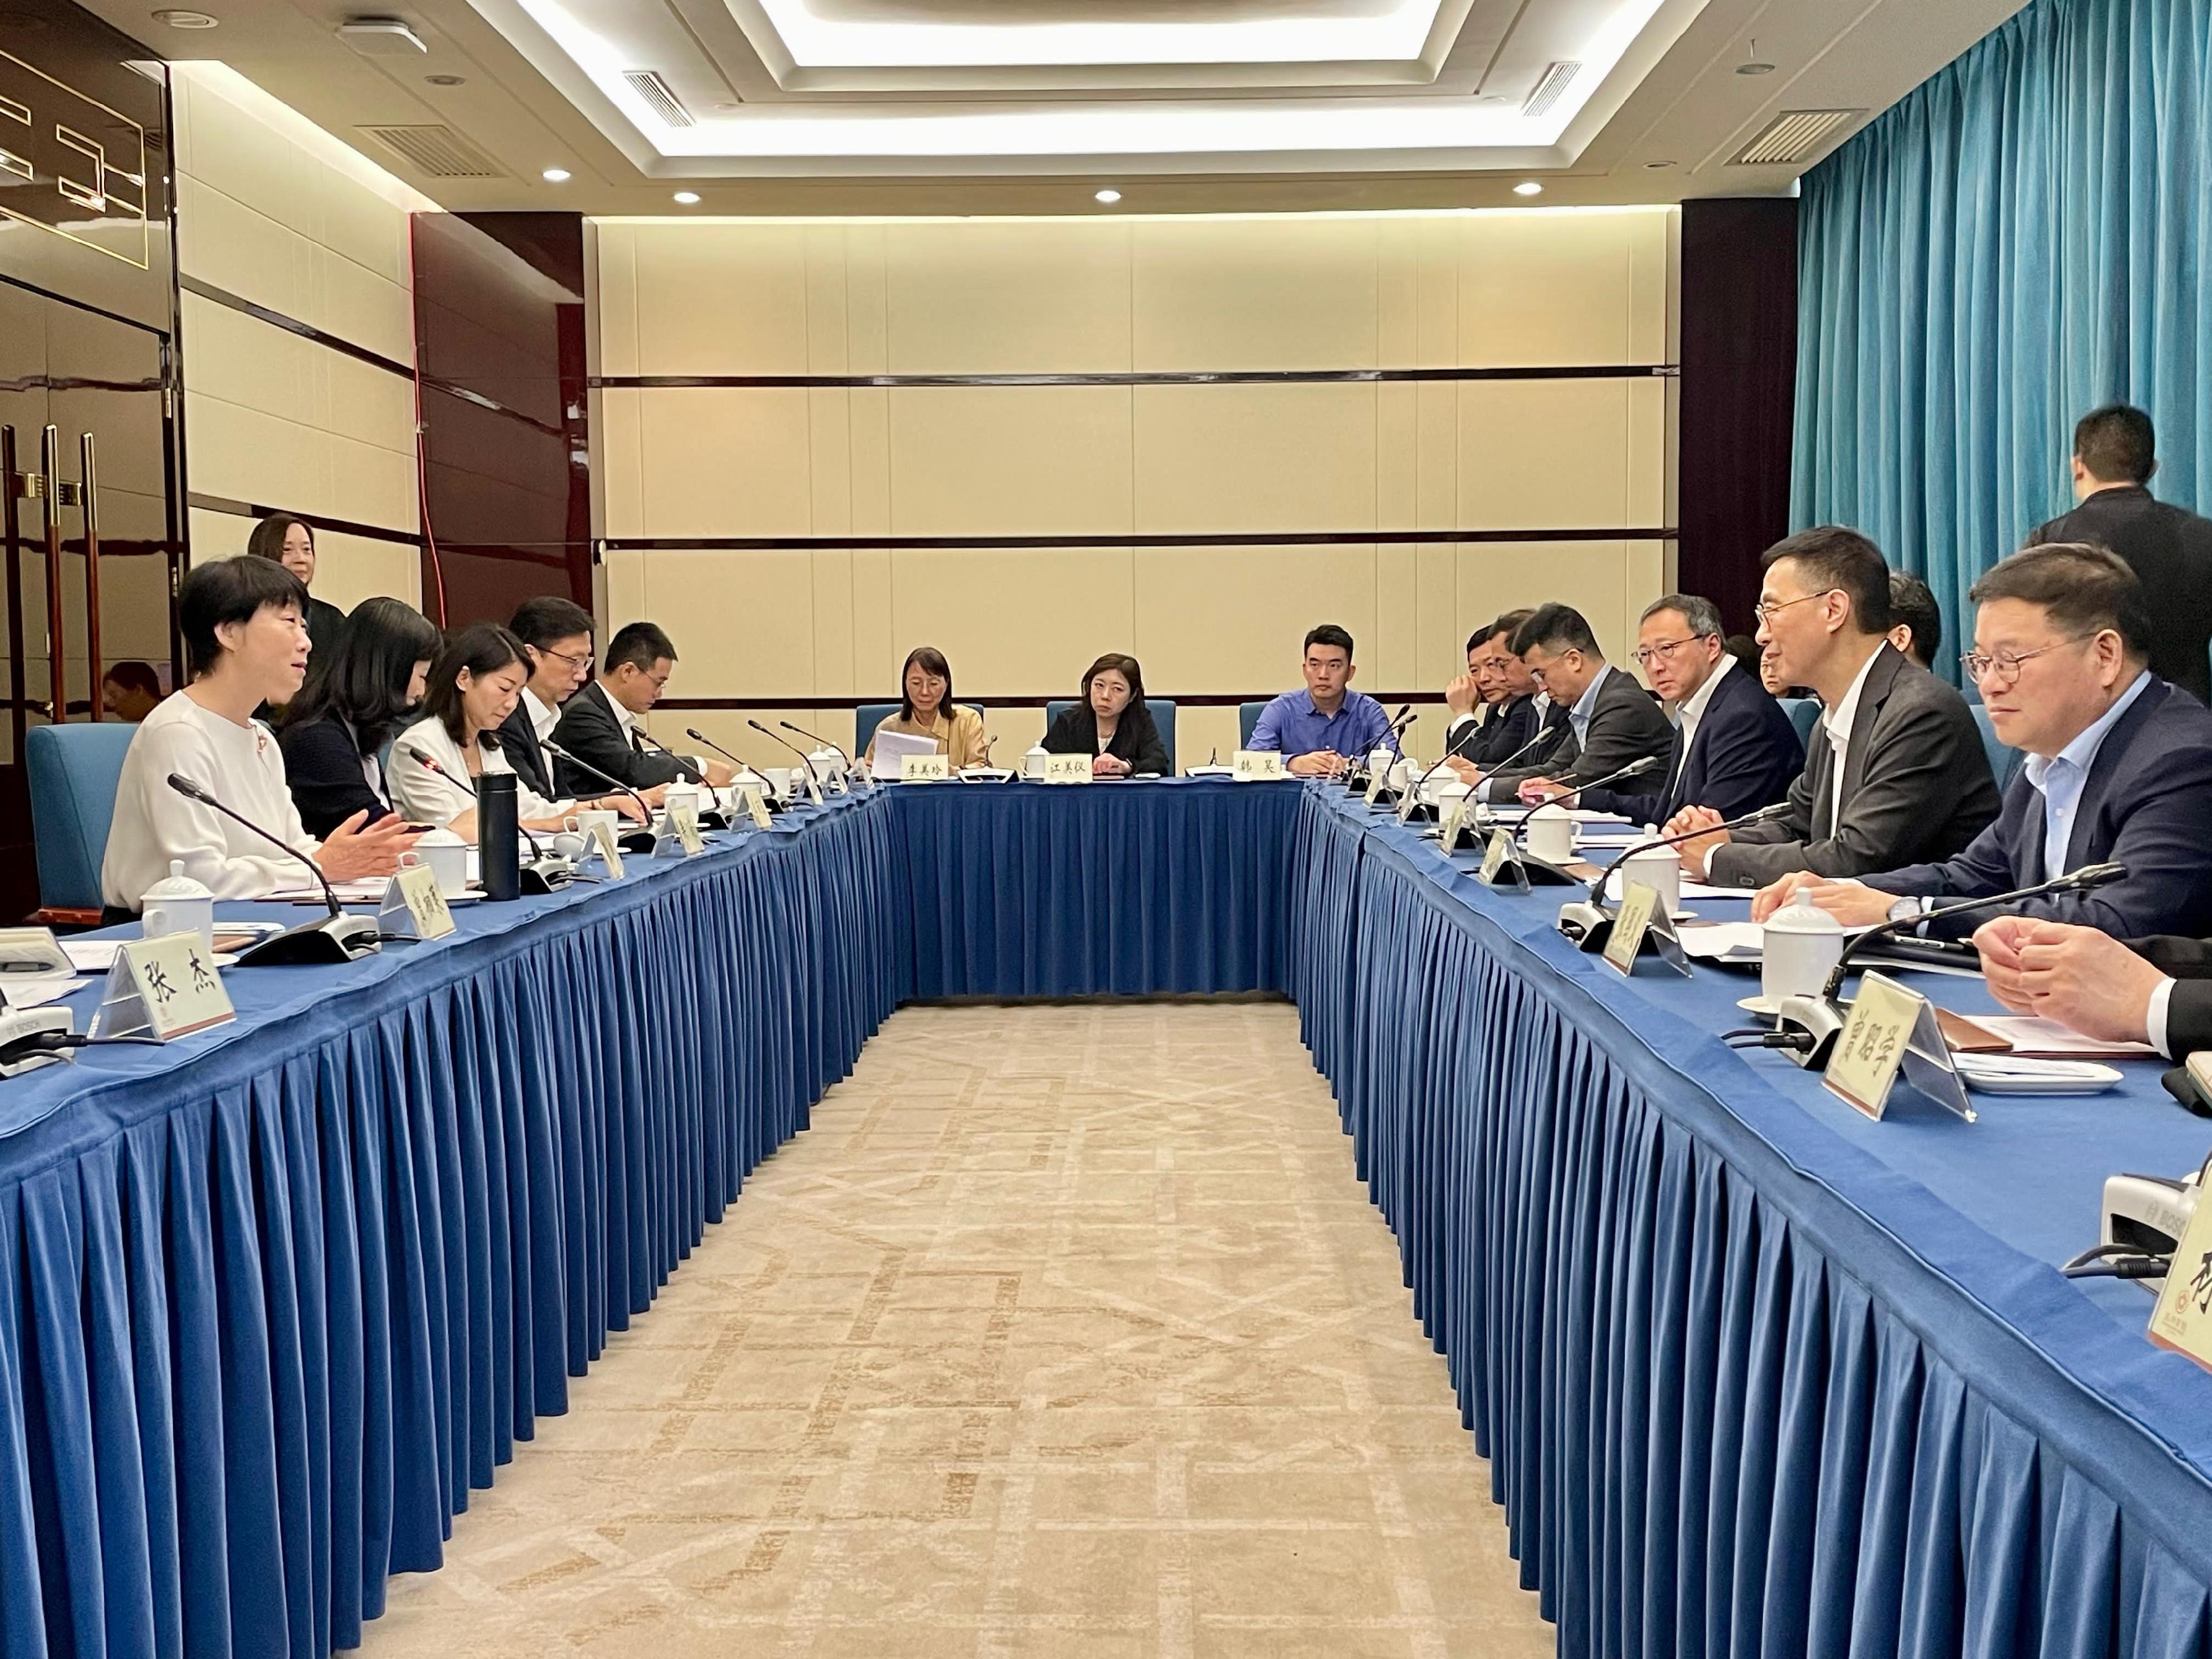 The Secretary for Culture, Sports and Tourism, Mr Kevin Yeung (second right), today (November 4) attended a seminar on reading for all in Shenzhen.